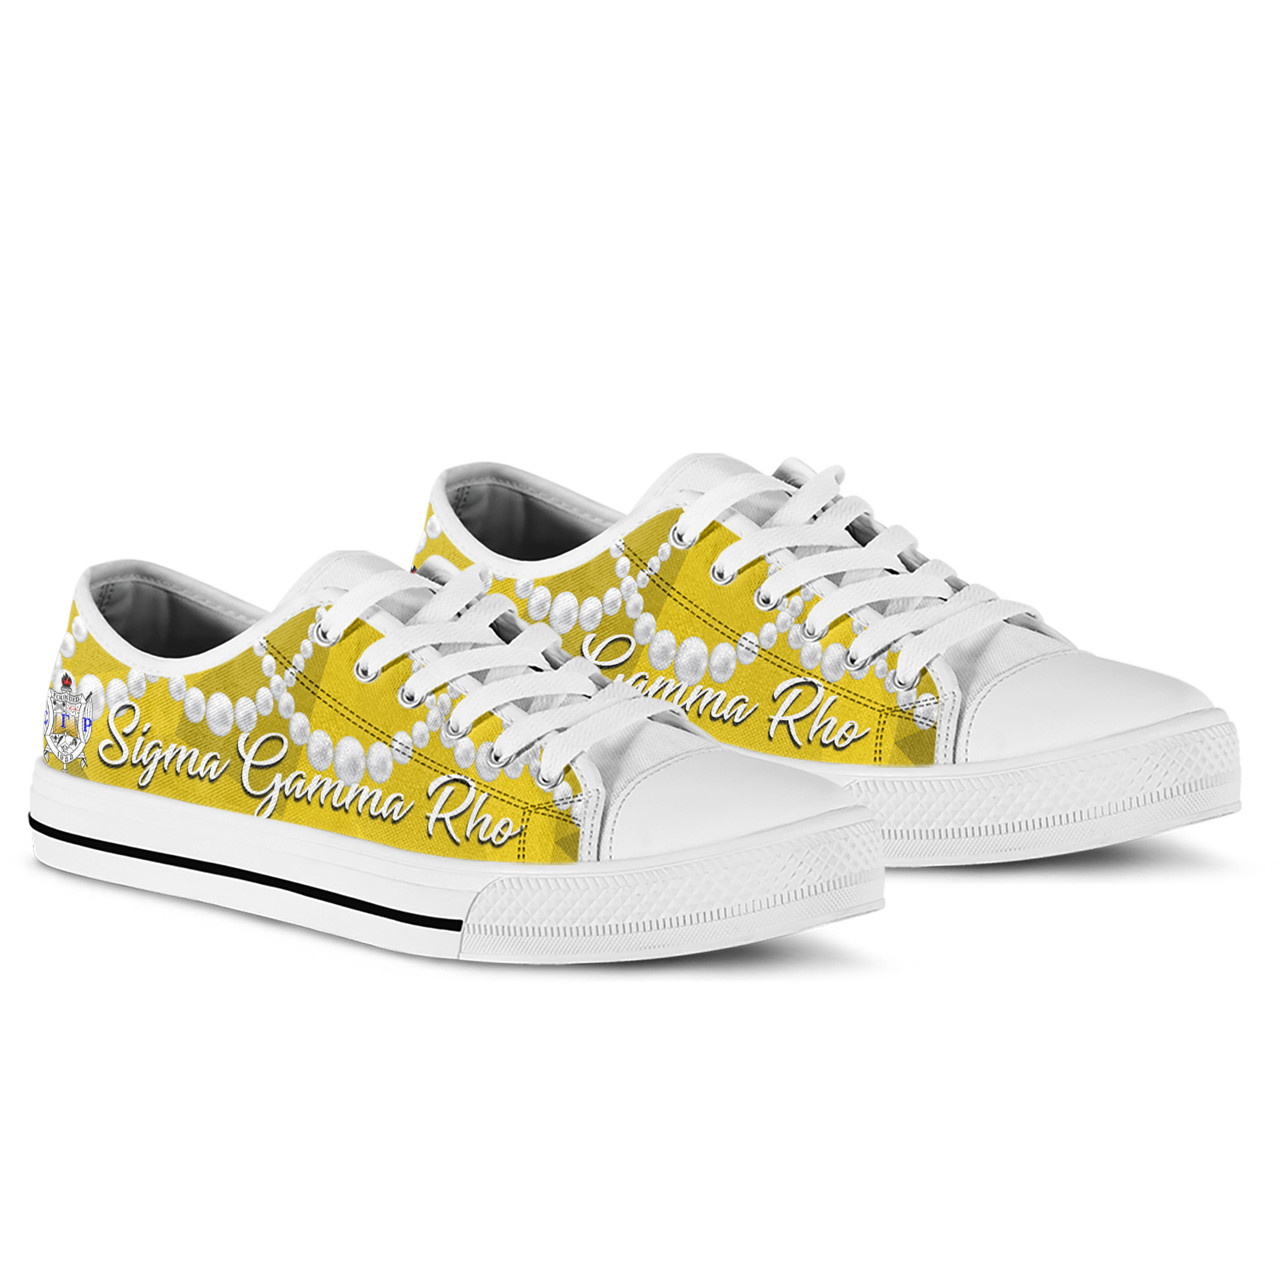 Sigma Gamma Rho Low Top Shoes Greek Life Chuck And Pearls